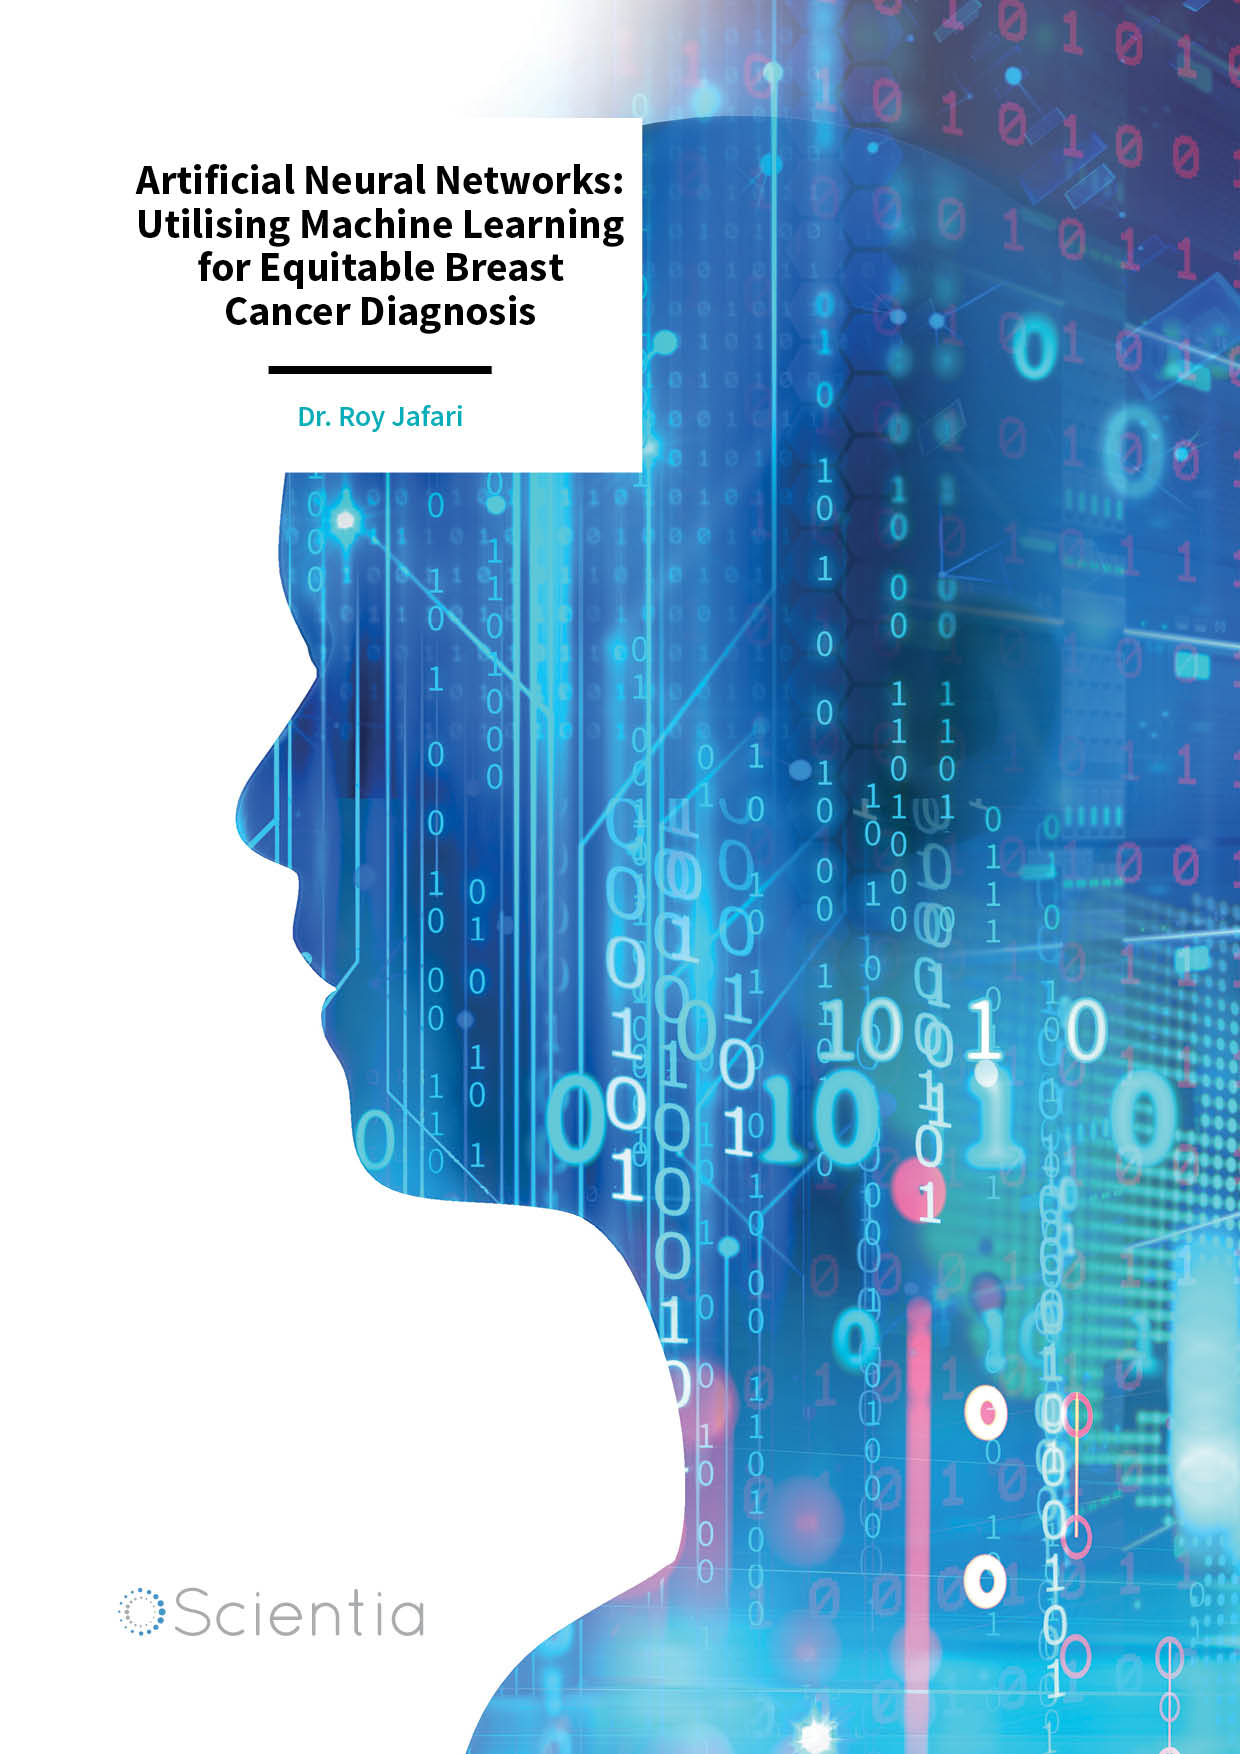 Dr. Roy Jafari – Artificial Neural Networks: Utilising Machine Learning for Equitable Breast Cancer Diagnosis